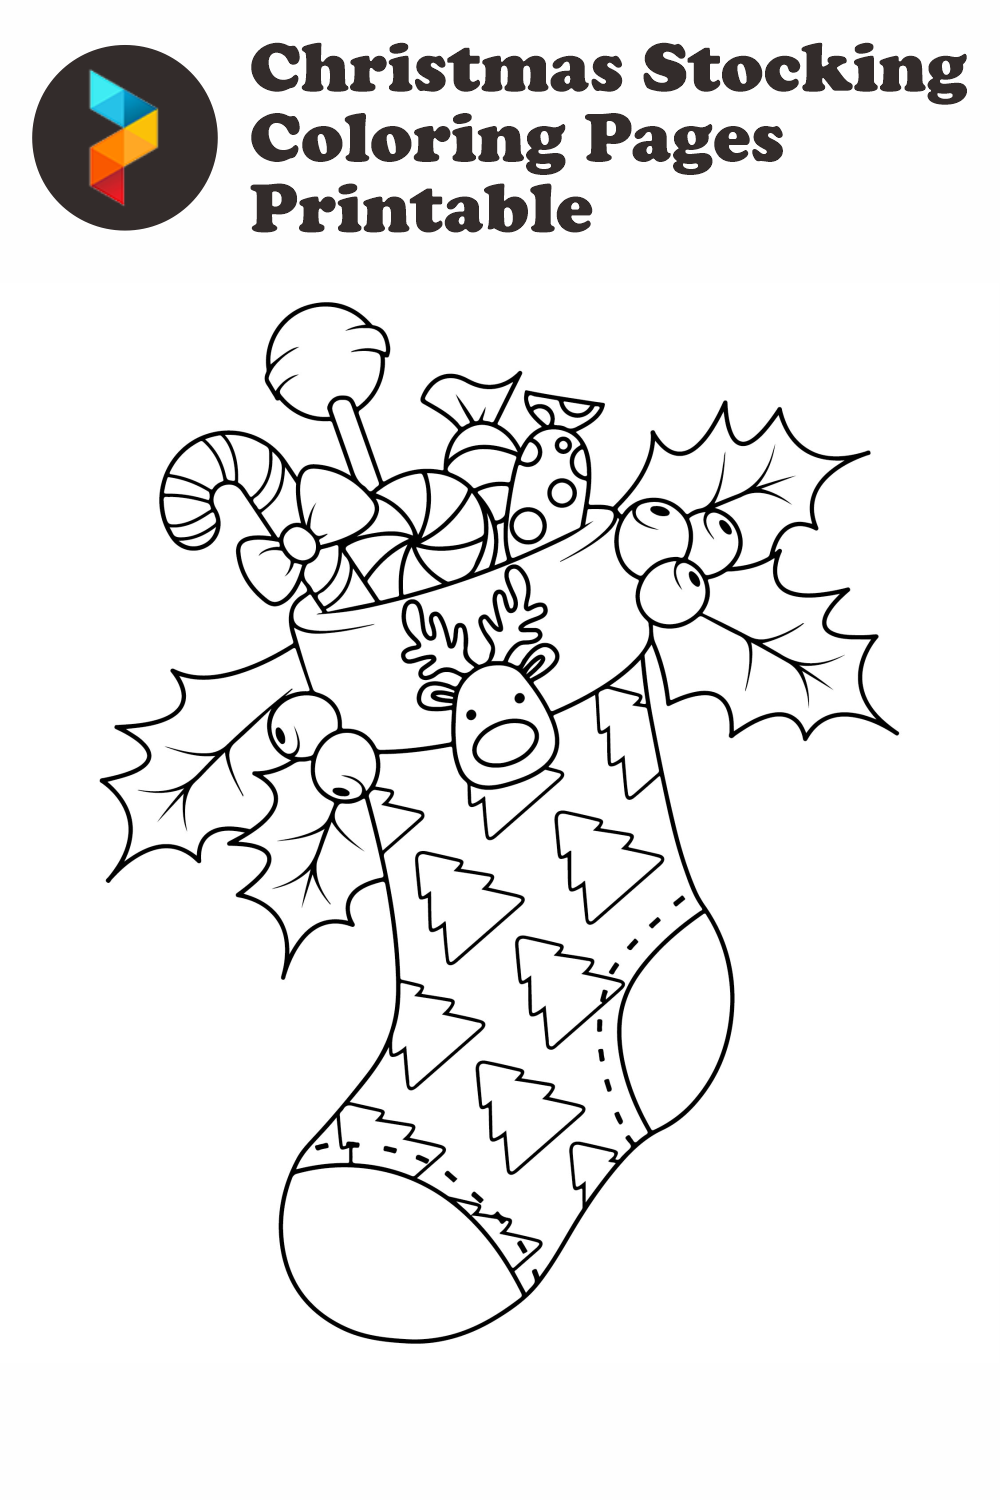 Christmas Stocking Coloring Pages Printable